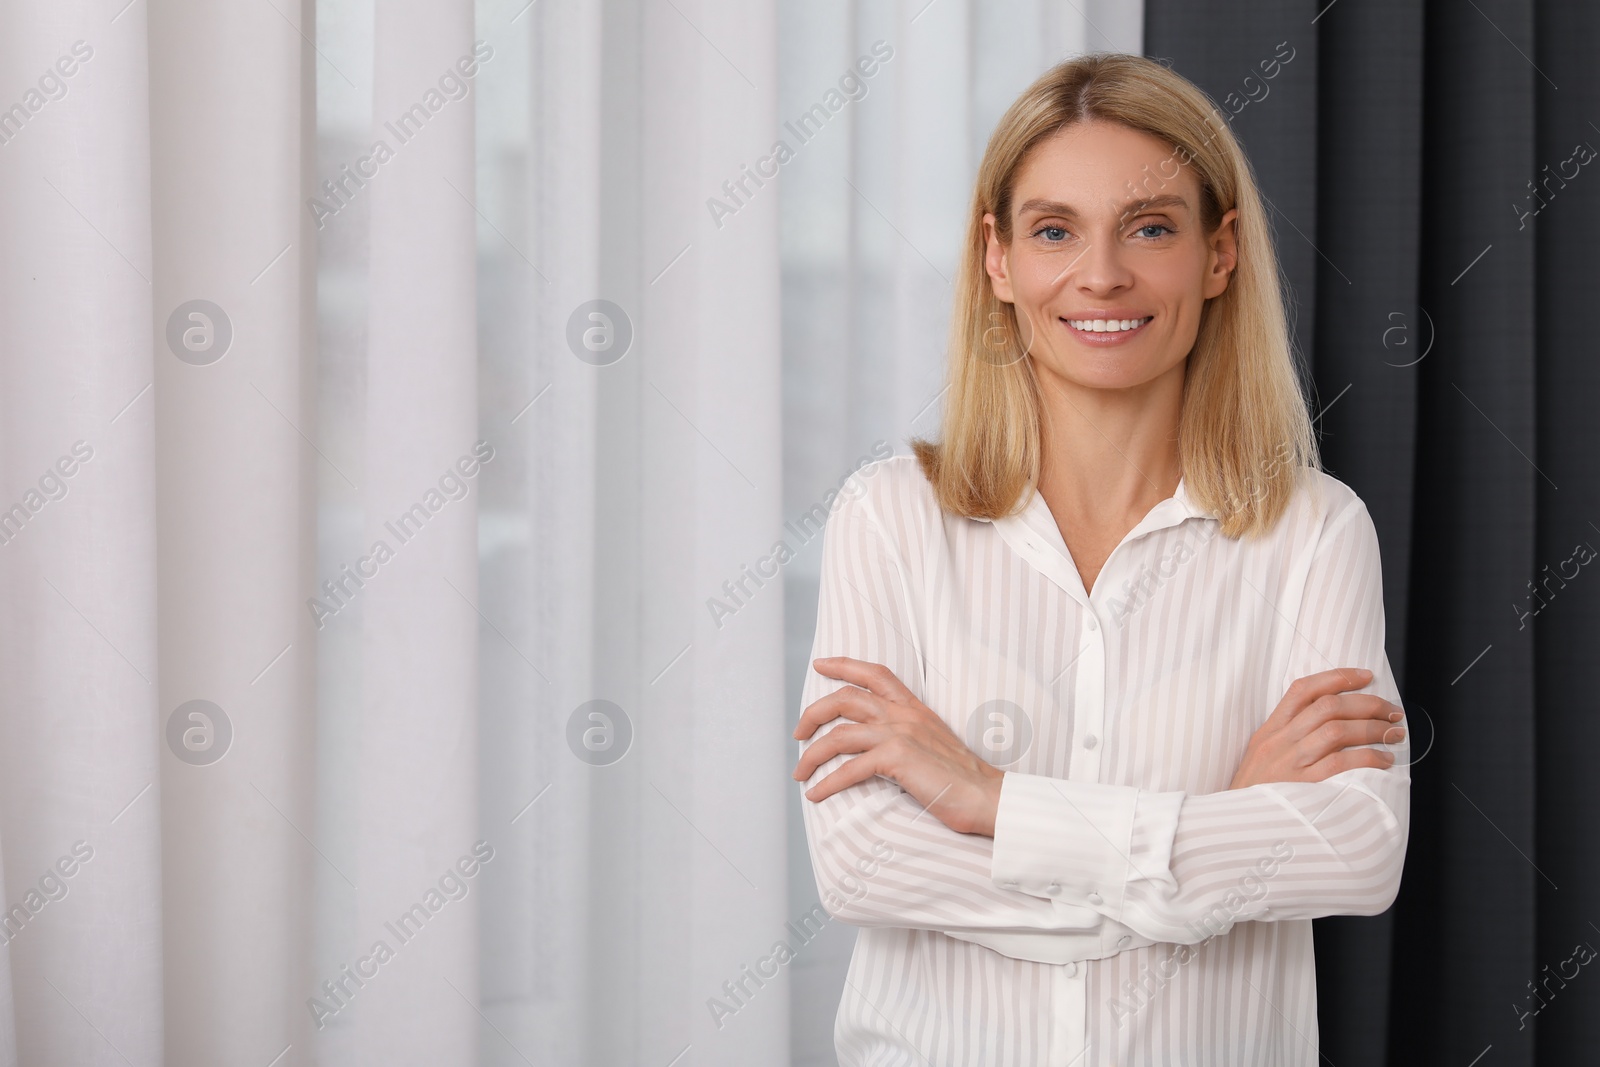 Photo of Portrait of confident entrepreneur or businesswoman with crossed arms, space for text. Beautiful lady with blonde hair smiling and looking into camera